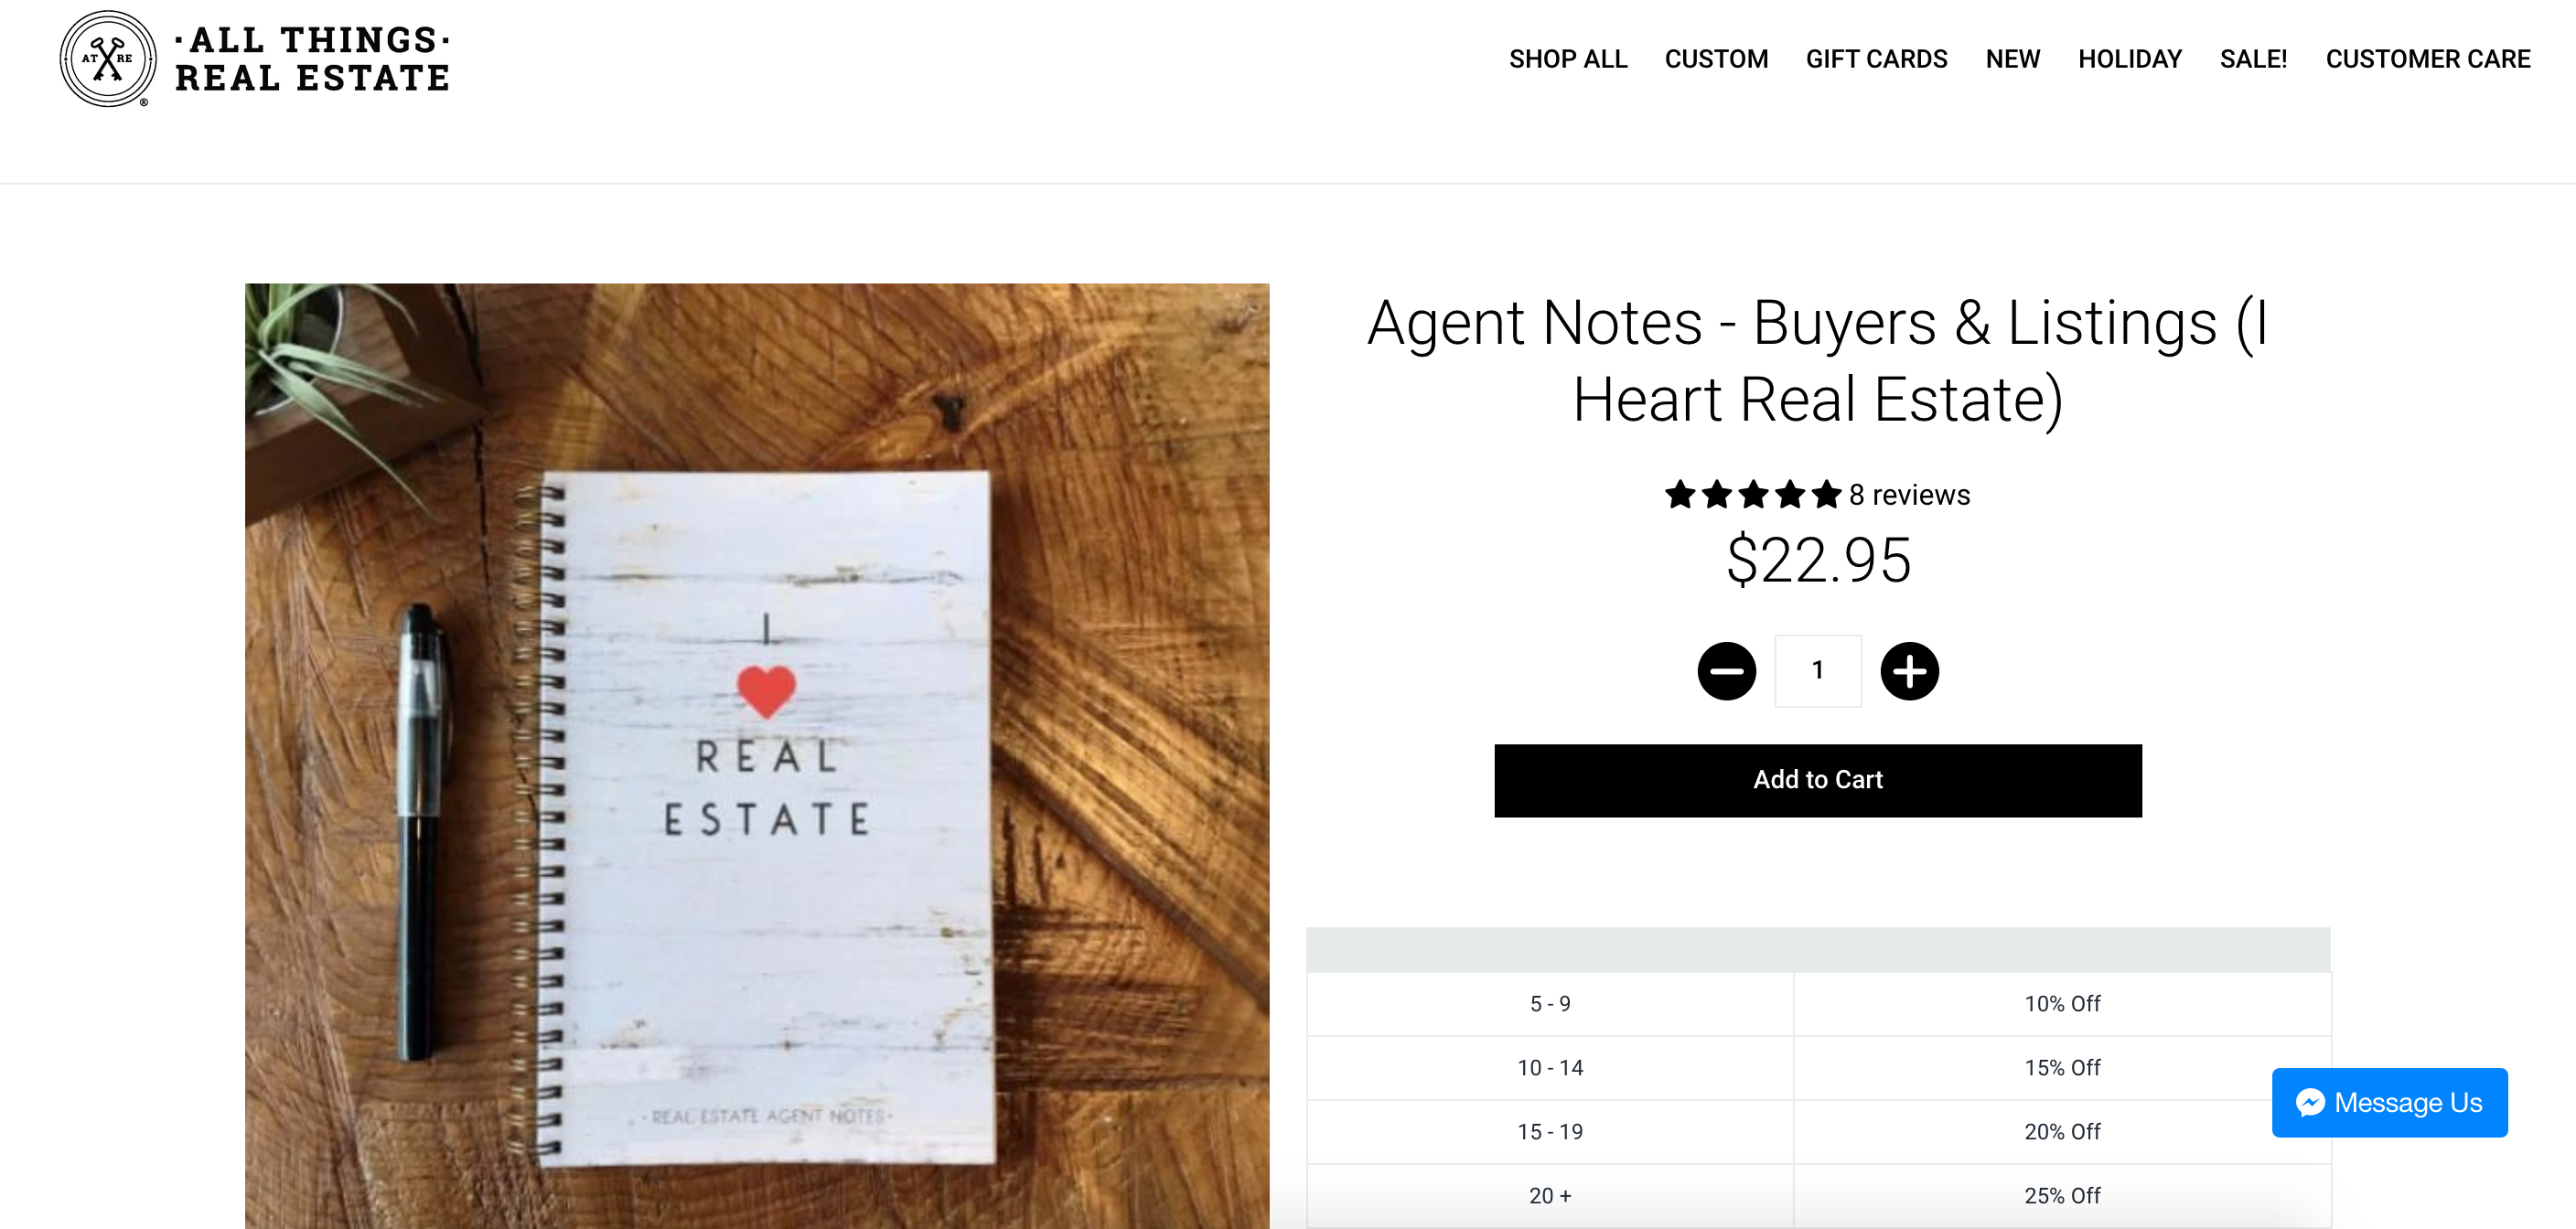 Image of All Things Real Estate homebuyers and sellers notebook